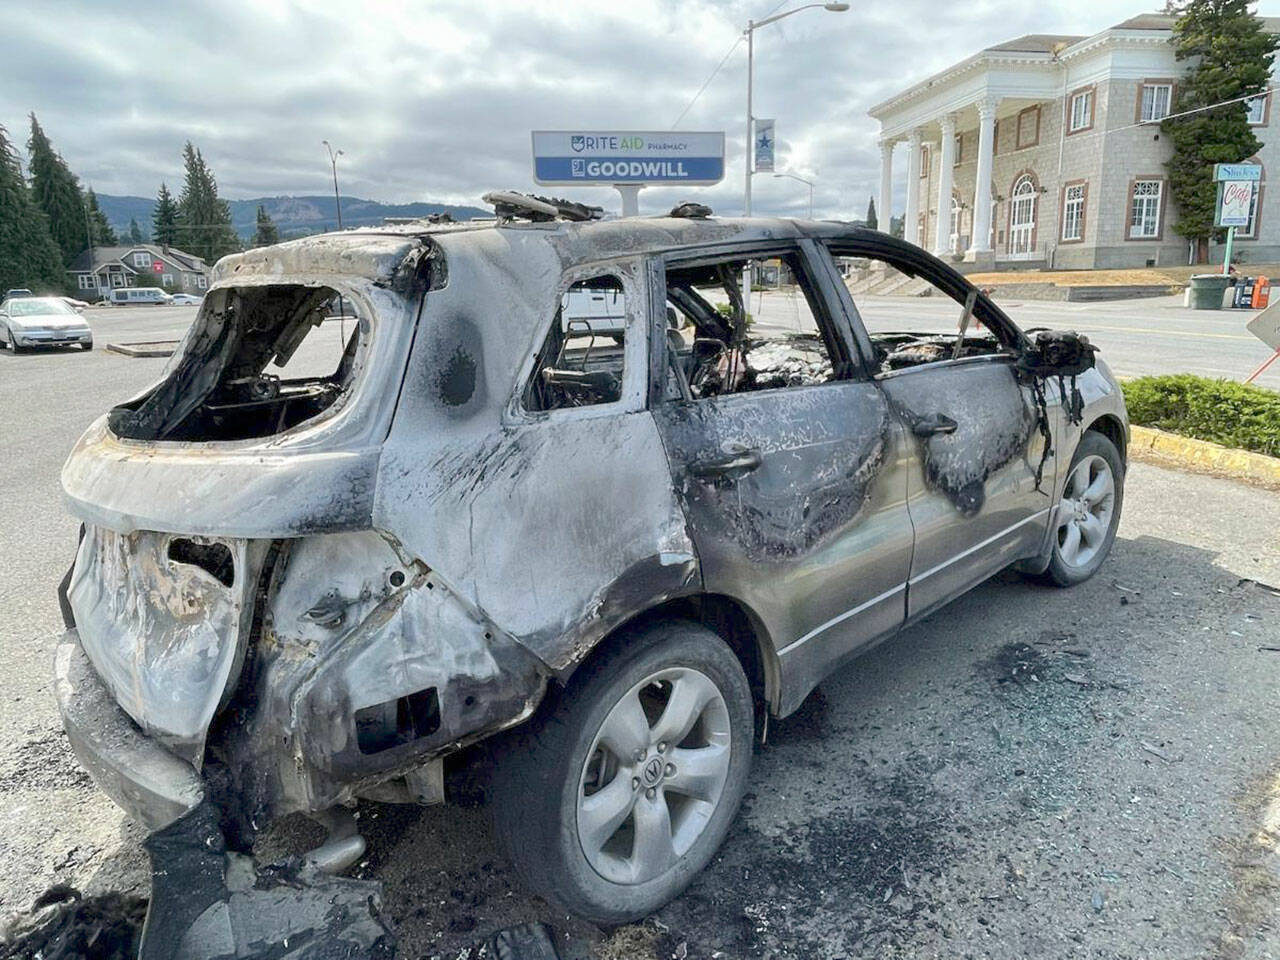 Authorities said an SUV was torched early Friday morning in the Goodwill Industries parking lot in Port Angeles. (Paul Gottlieb/Peninsula Daily News)